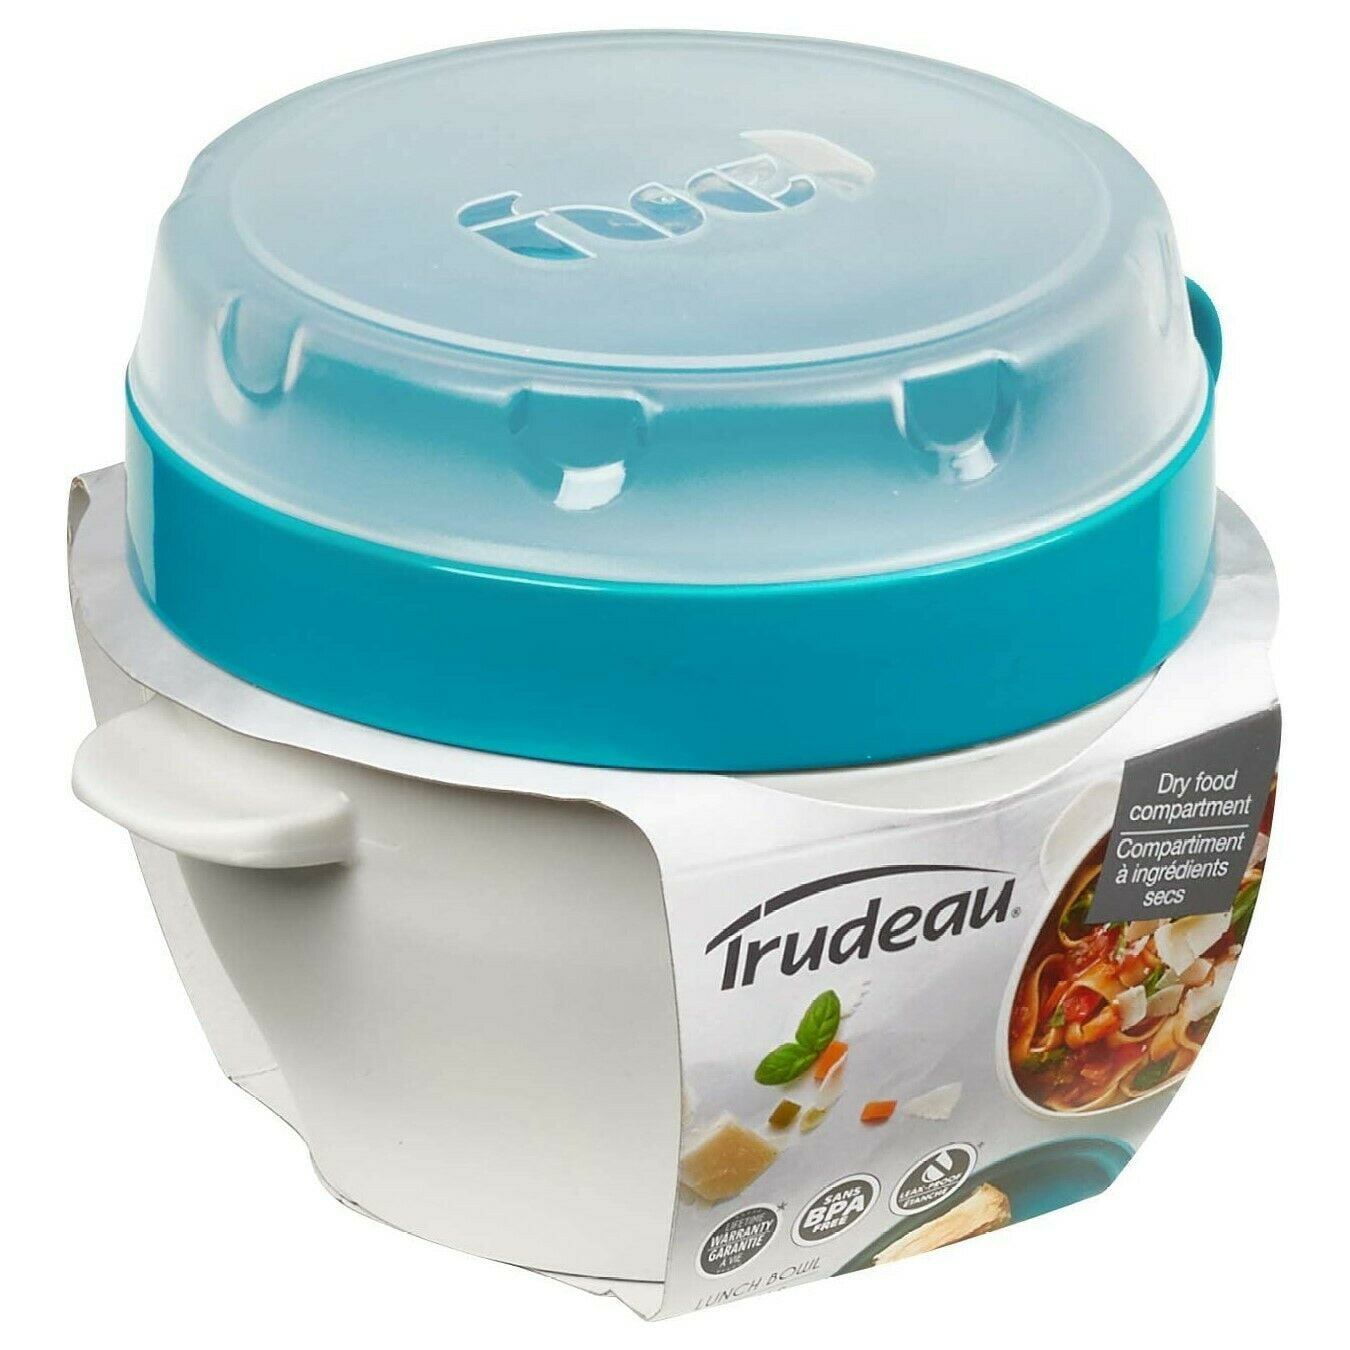  Trudeau Milk Cereal Container, 1 EA, Tropical: Home & Kitchen